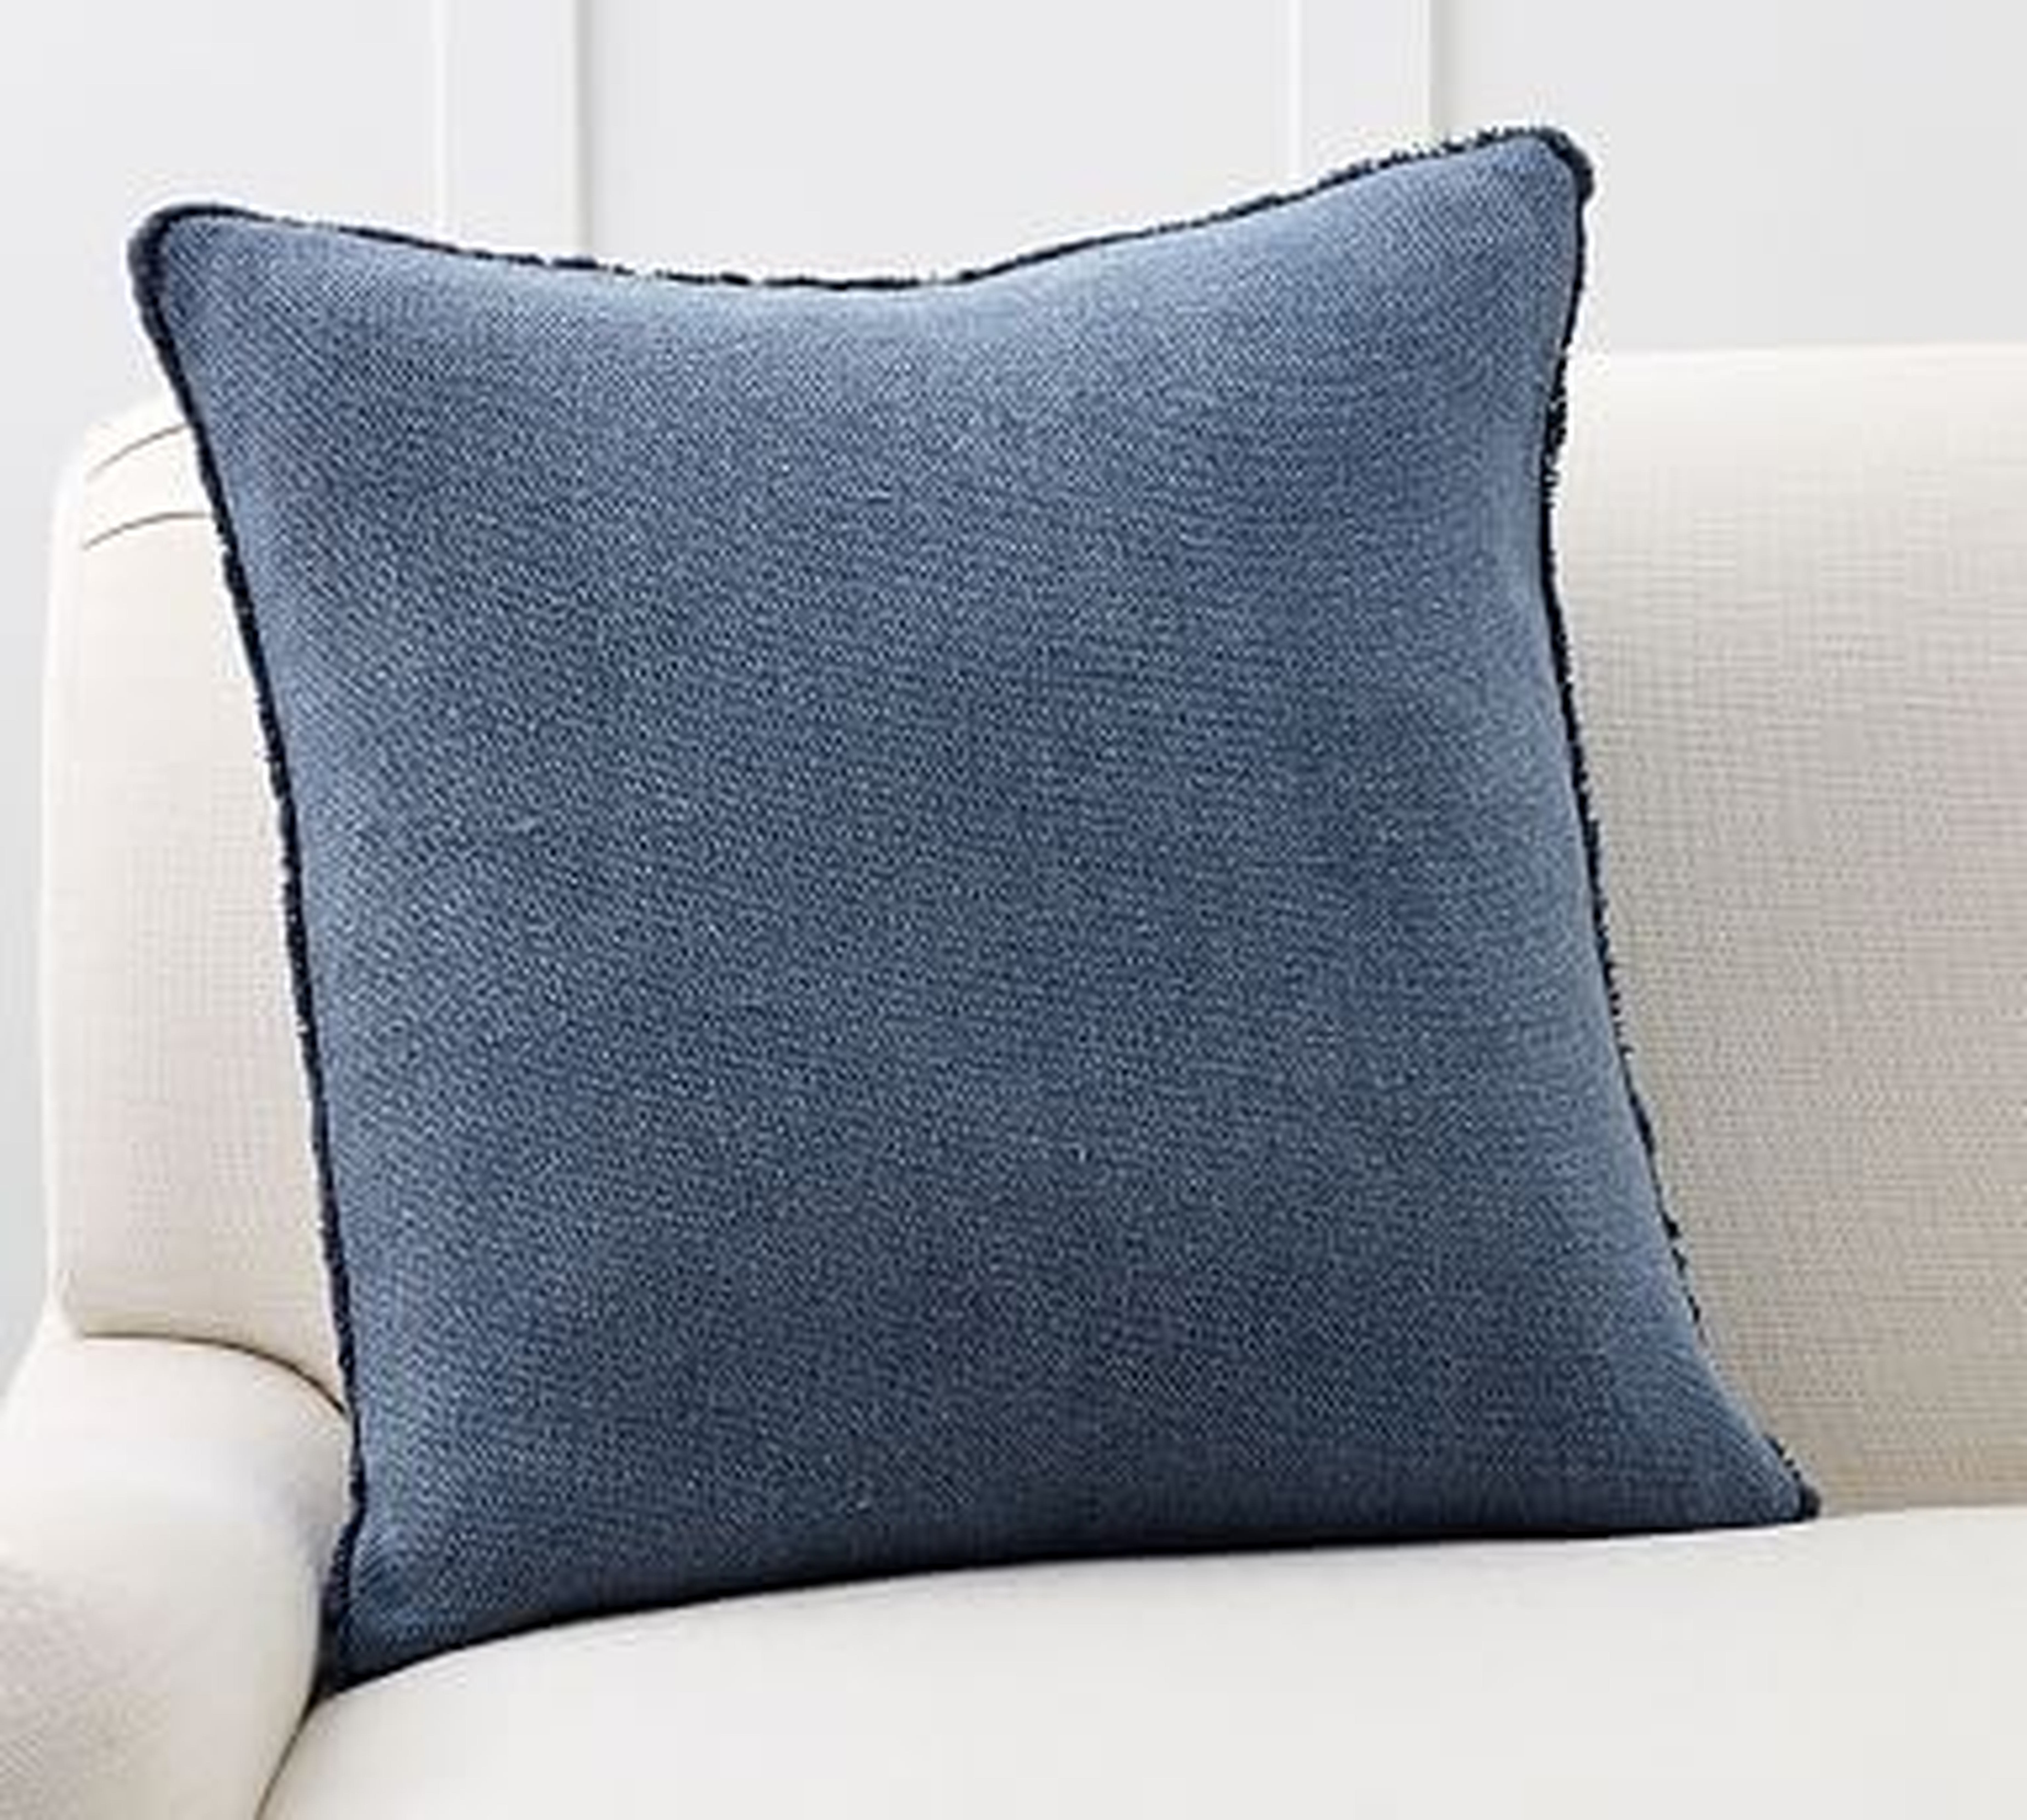 Willa Fringe Textured Pillow Cover, 22", Stormy Blue - Pottery Barn